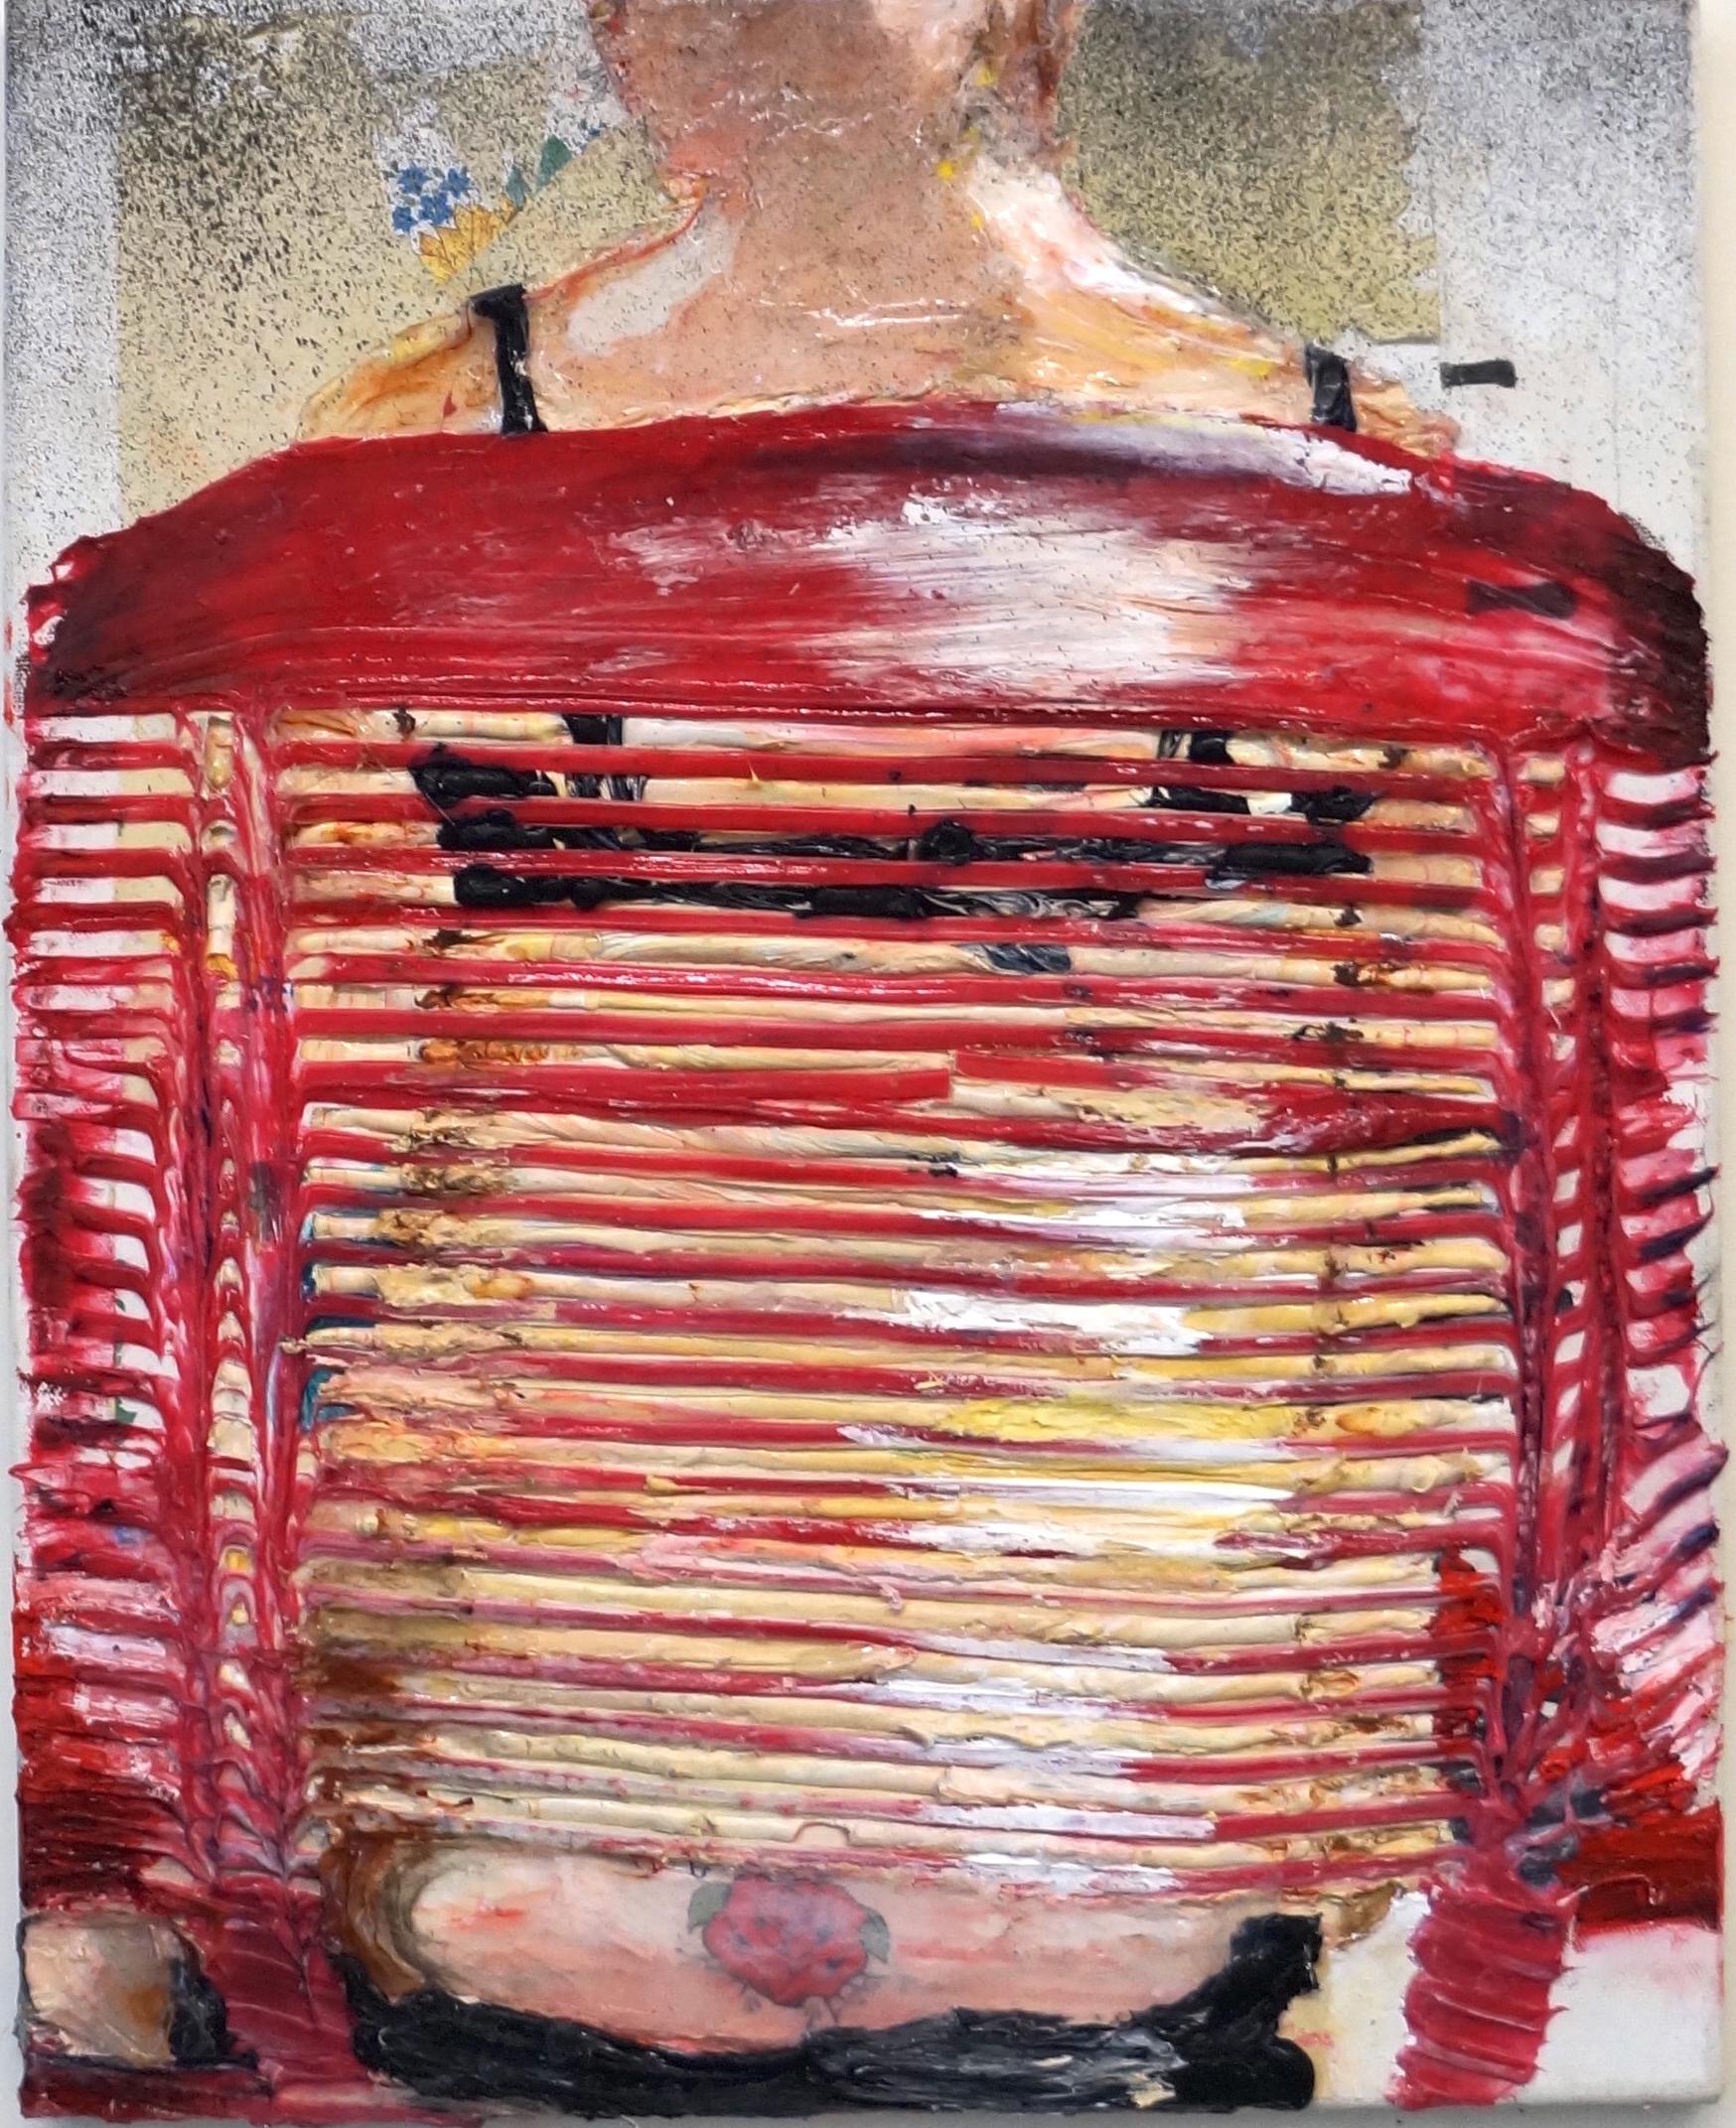 READER IN A LAWN CHAIR - Abstract Figure Painting, textured, red stripes 